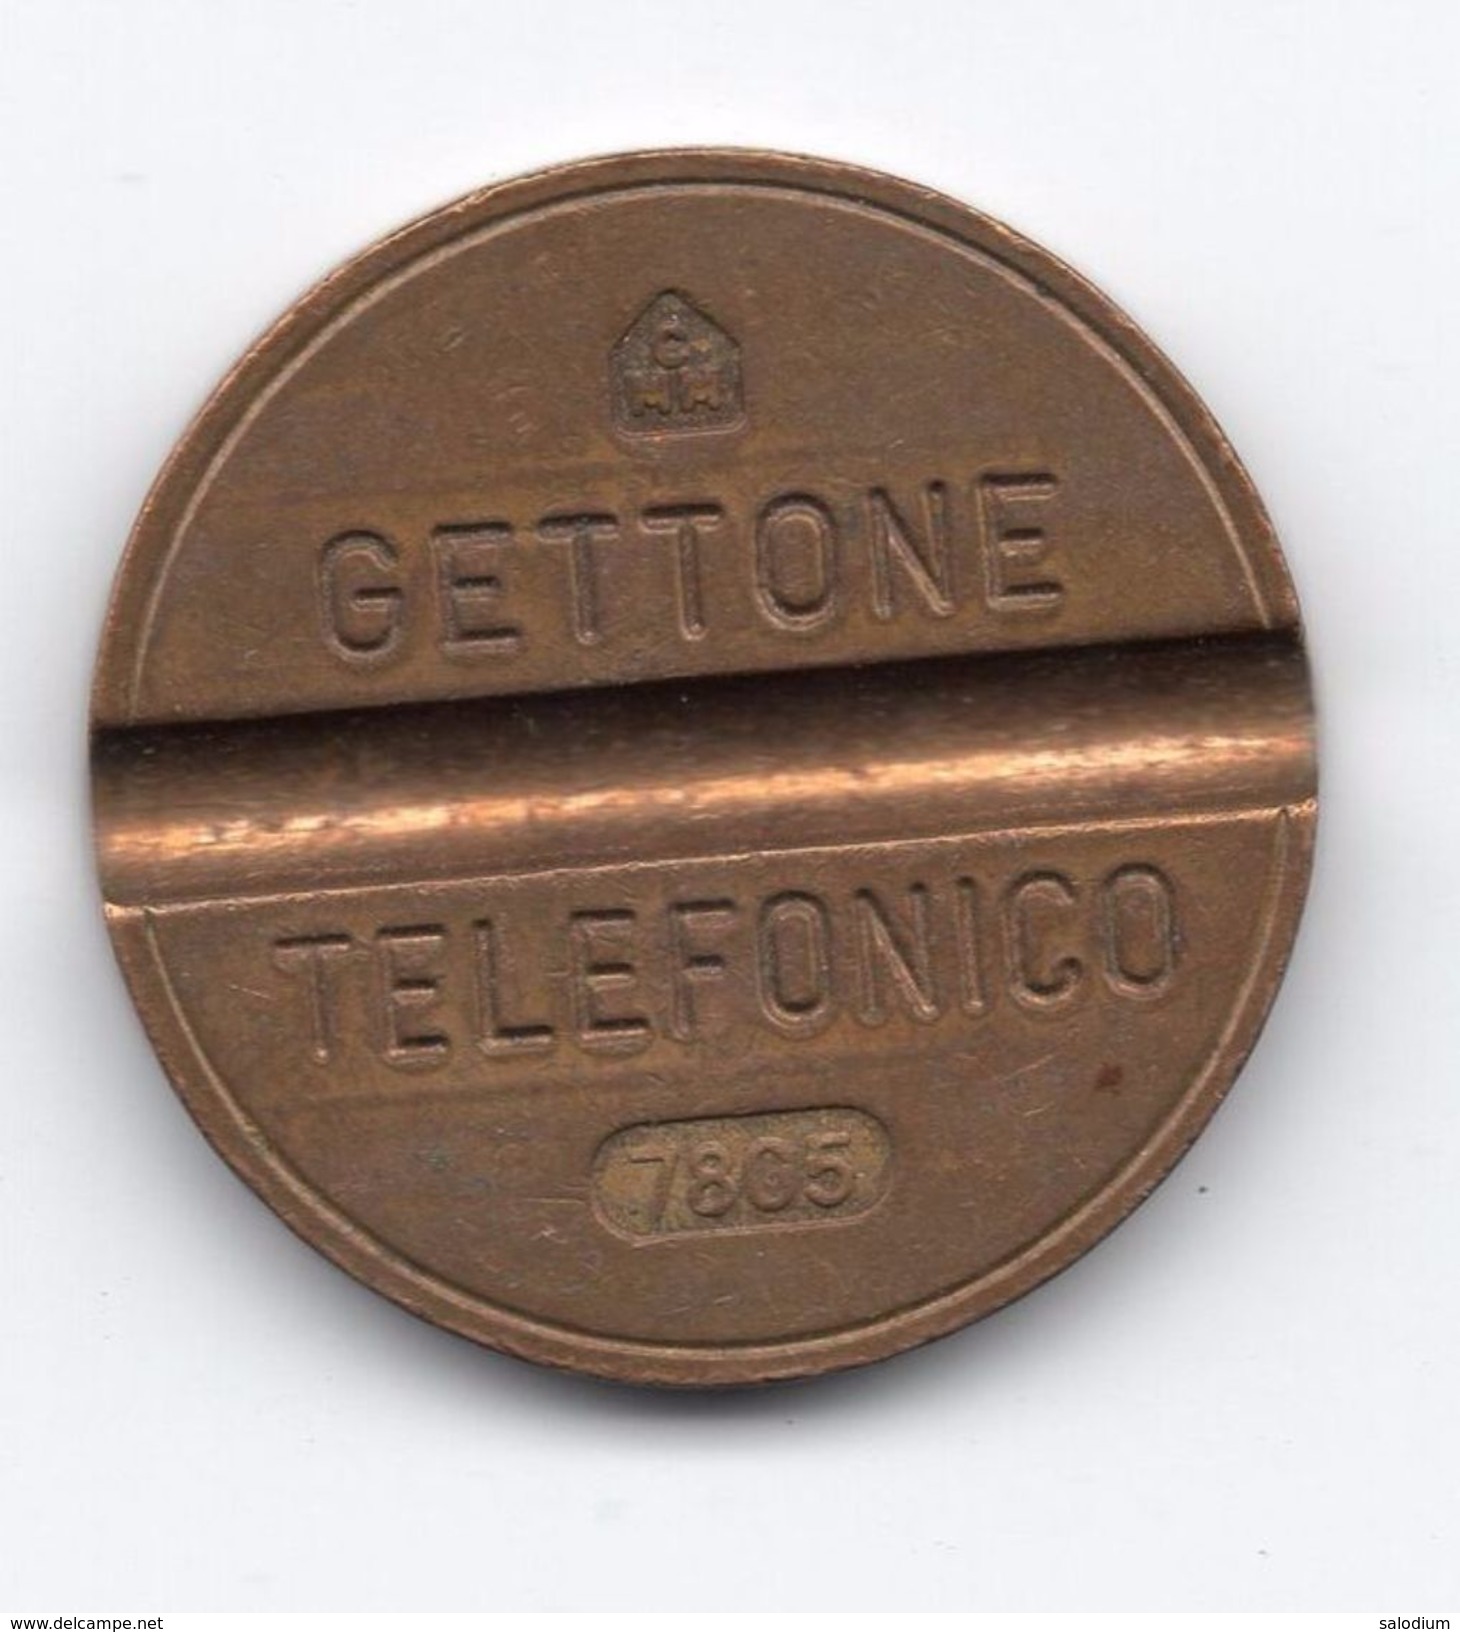 Gettone Telefonico 7805 Token Telephone - (Id-791) - Professionals/Firms